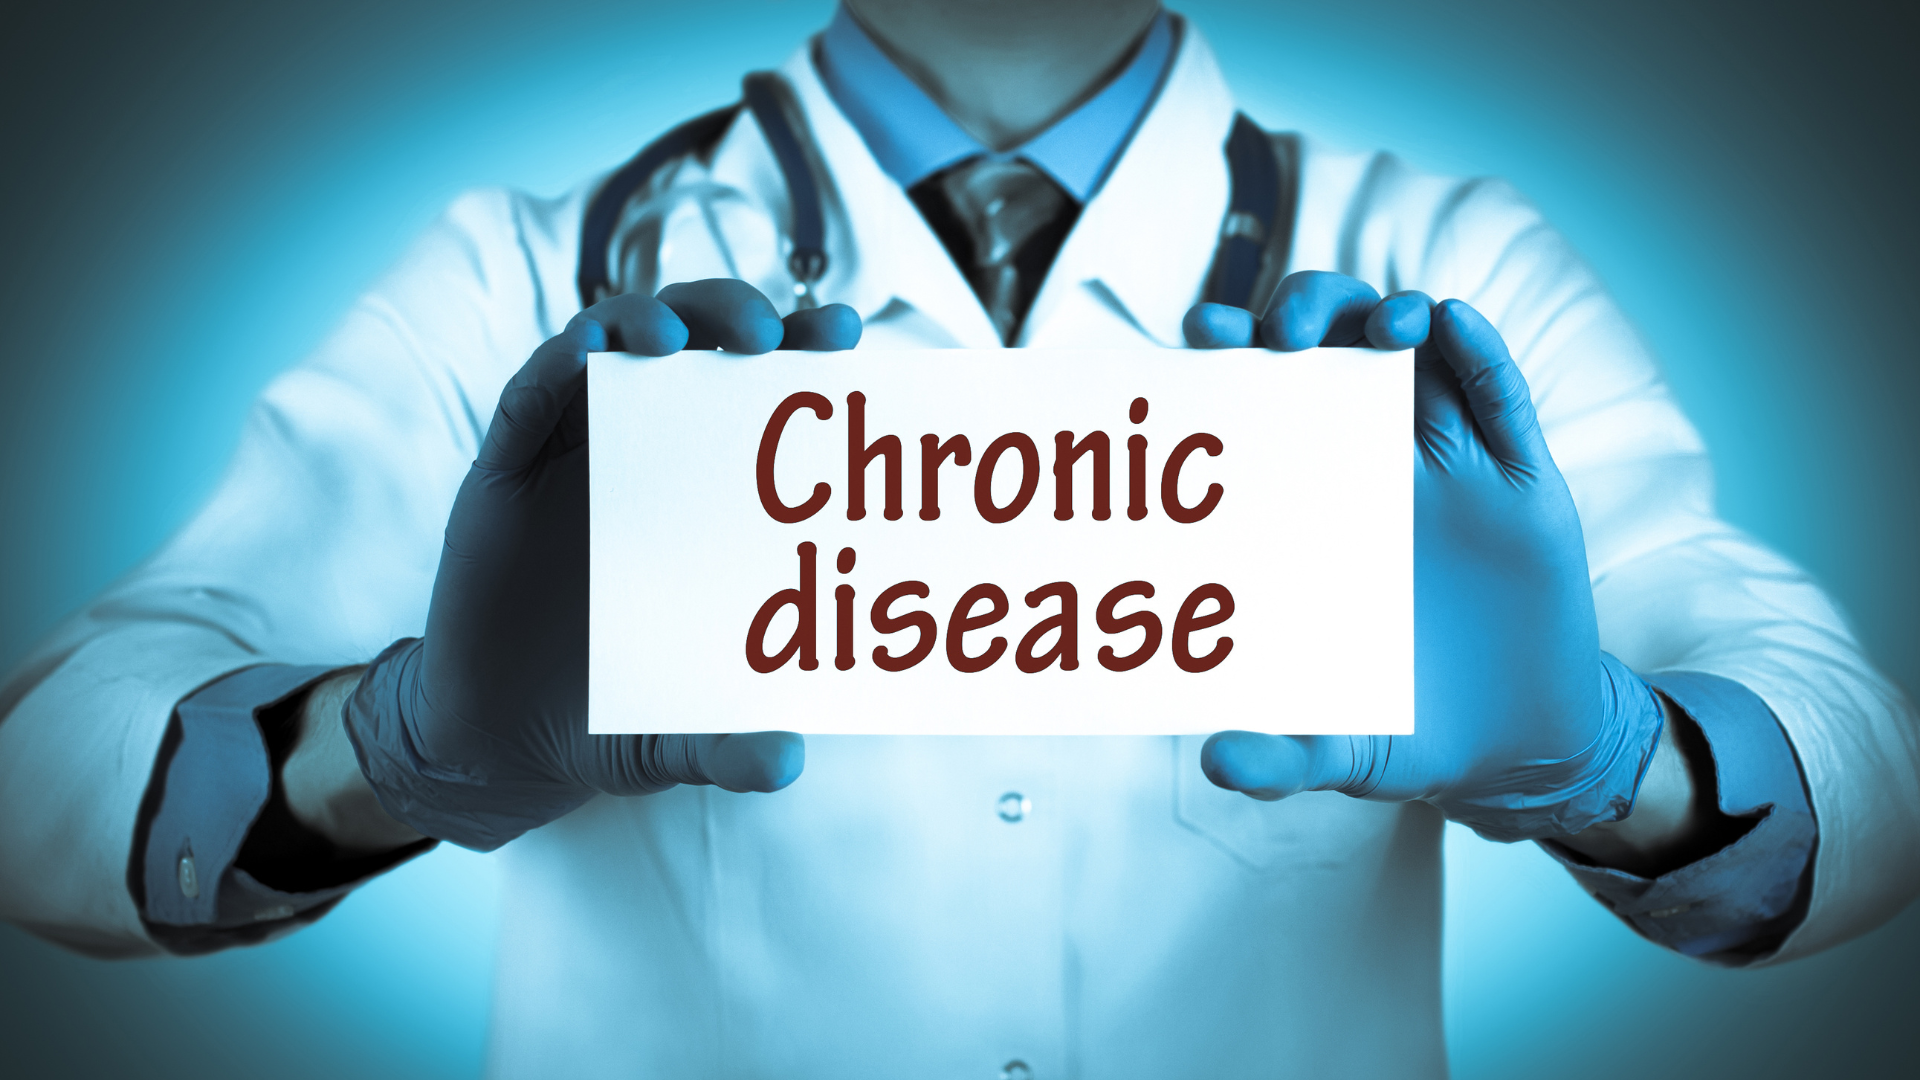 A doctor holding a chronic disease sign